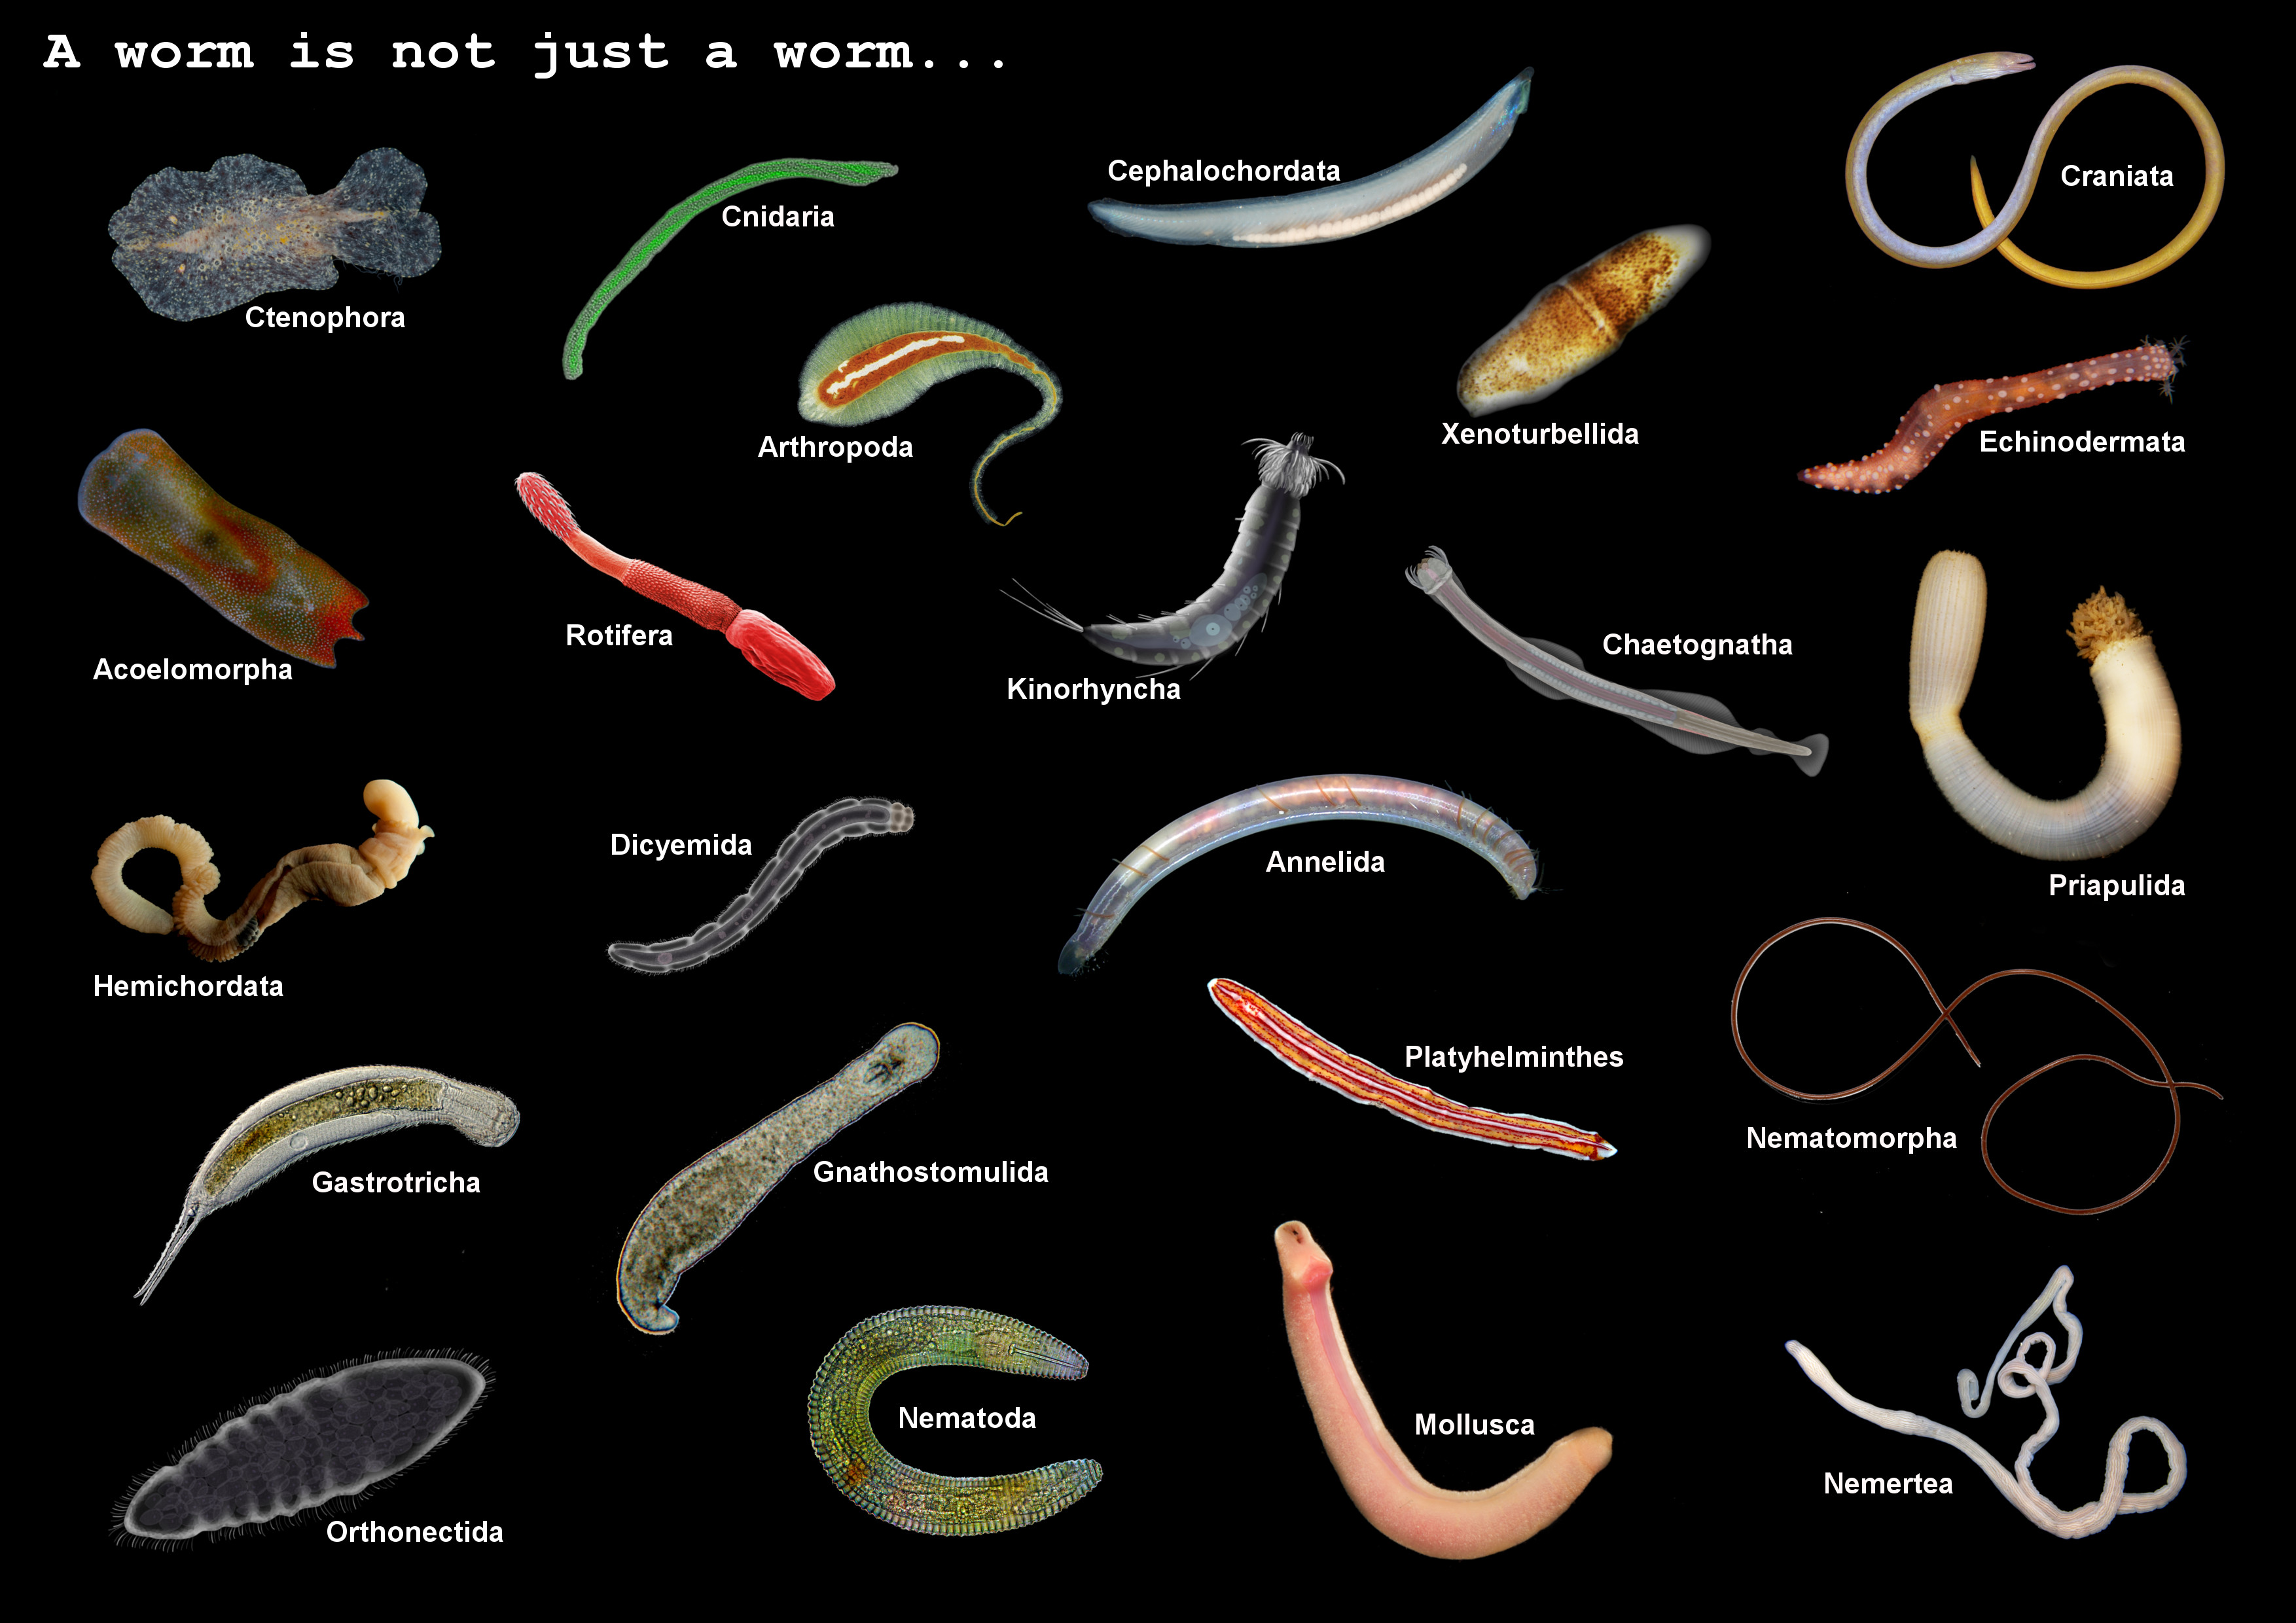 A worm is not just a worm... Dr. Ross Piper